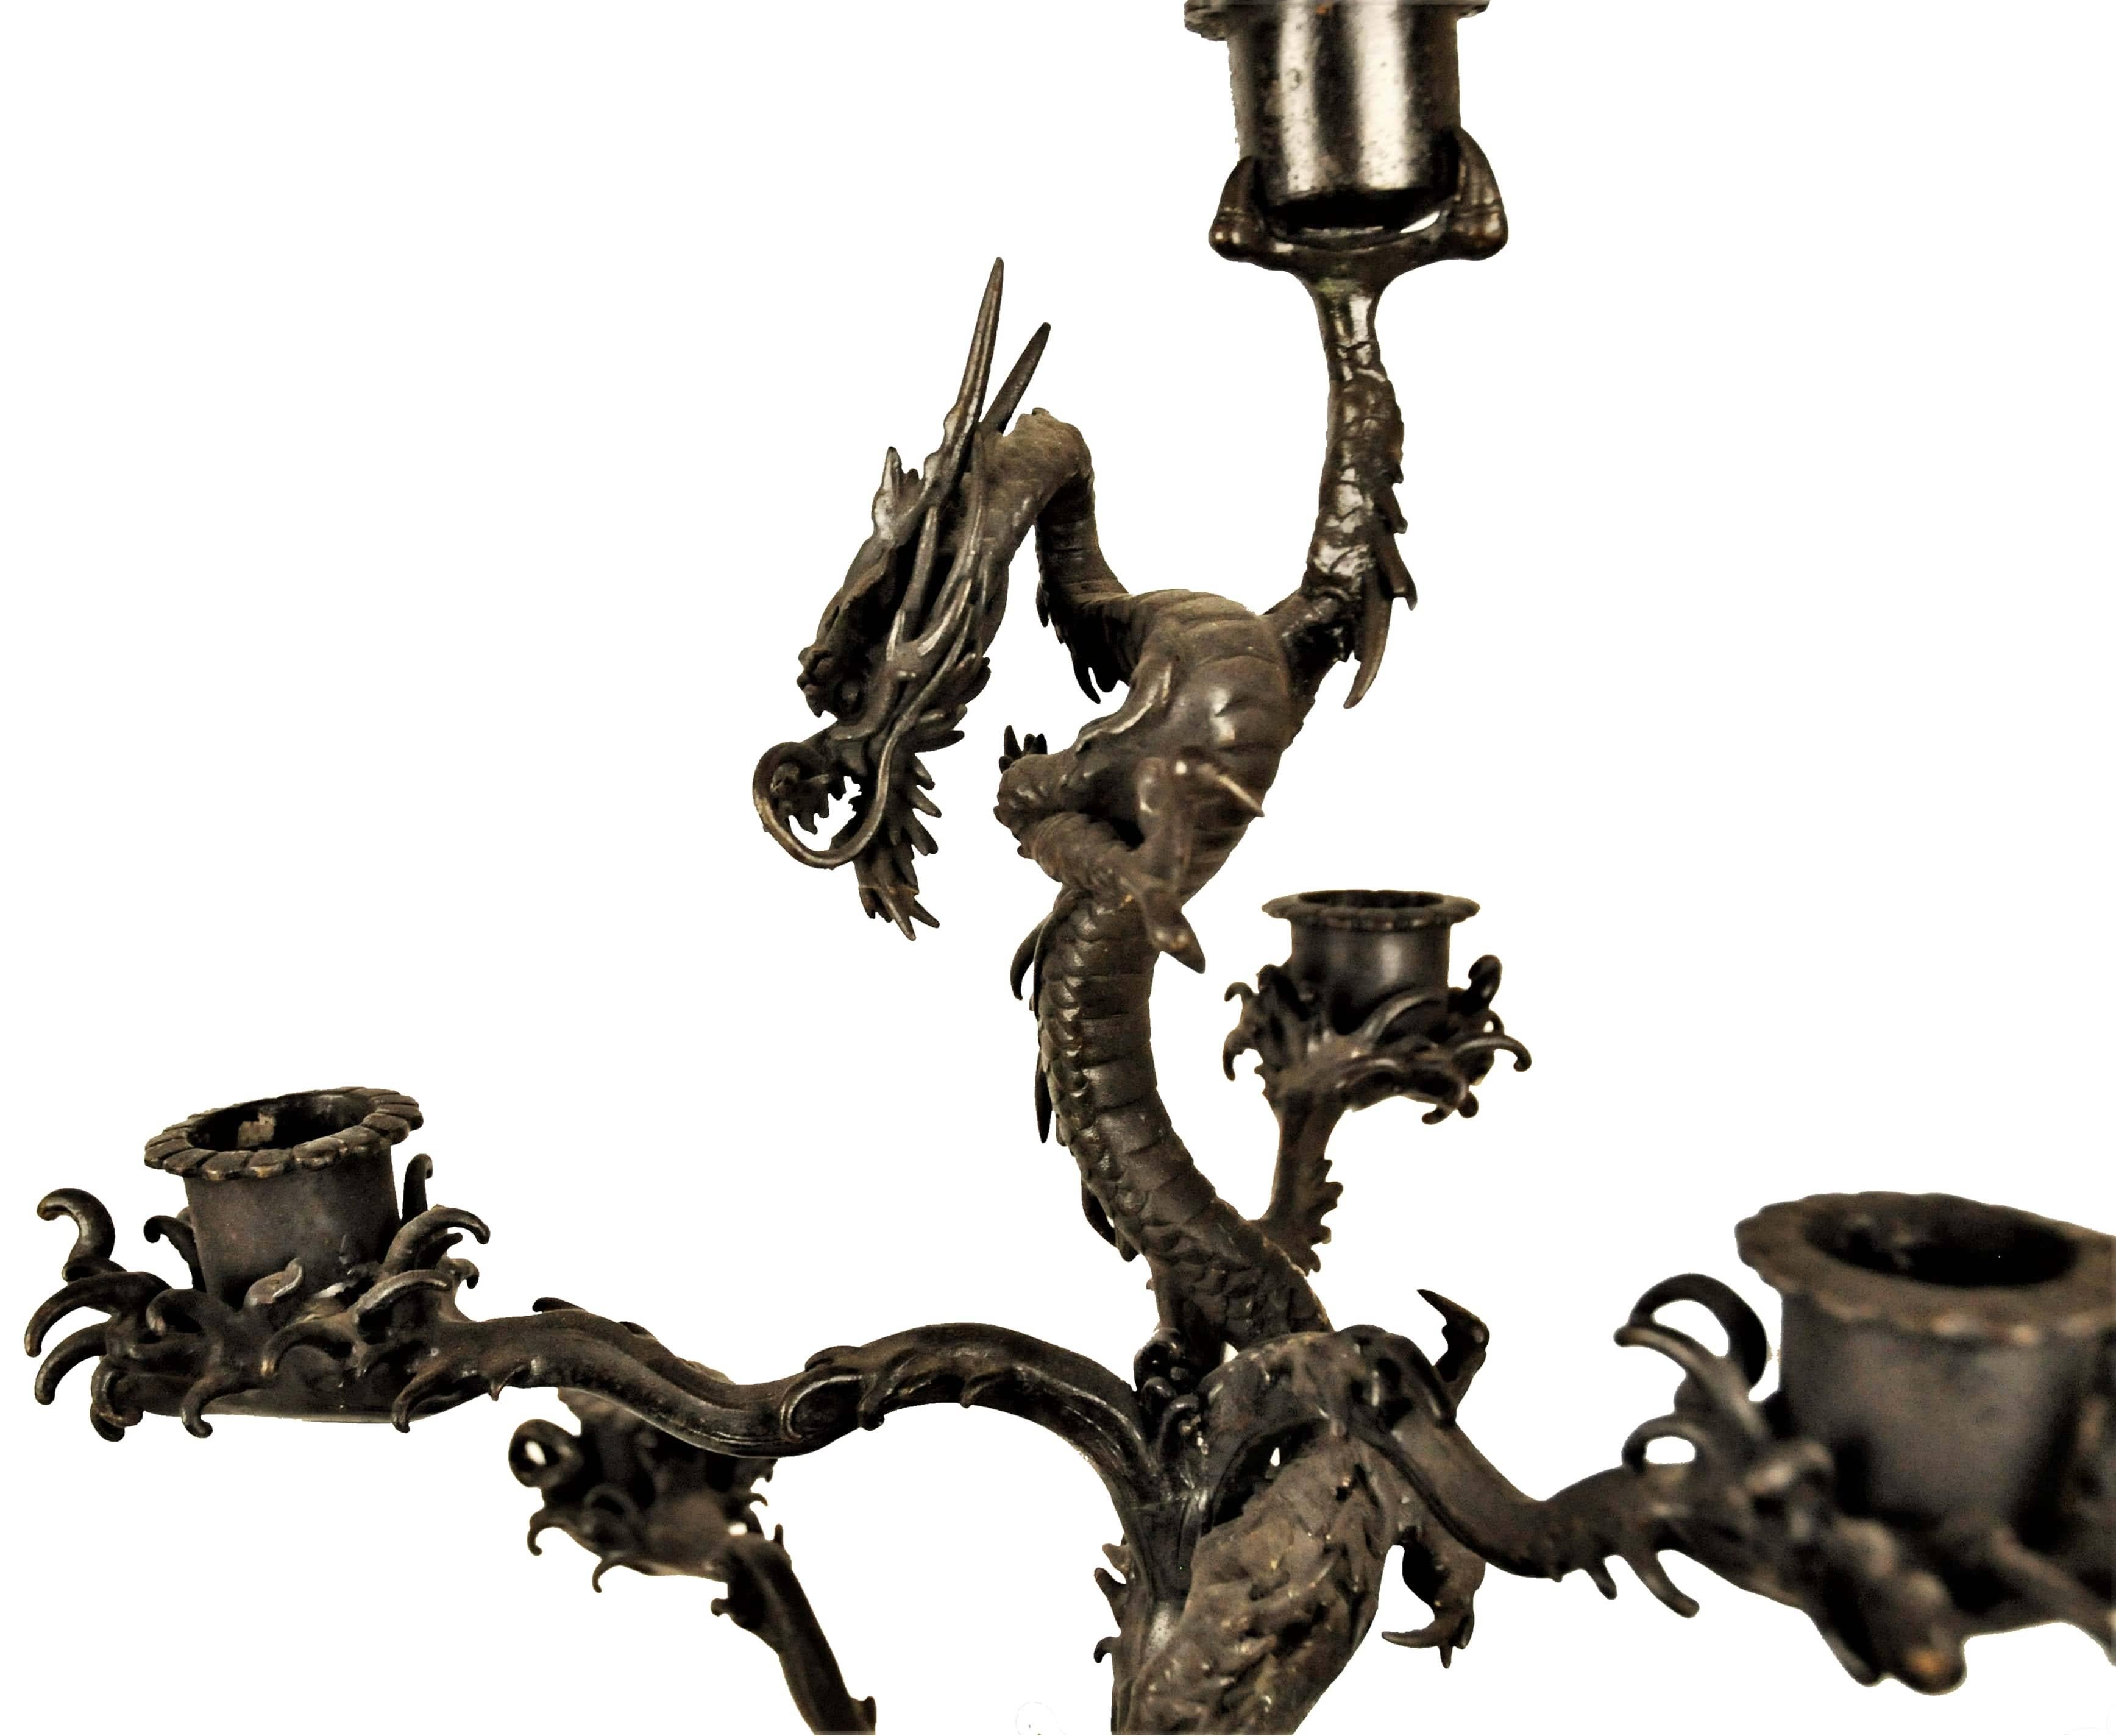 Japonisme Pair of Japanese Patinated Bronze Candelabras, Meiji Period, ca. 1900 For Sale